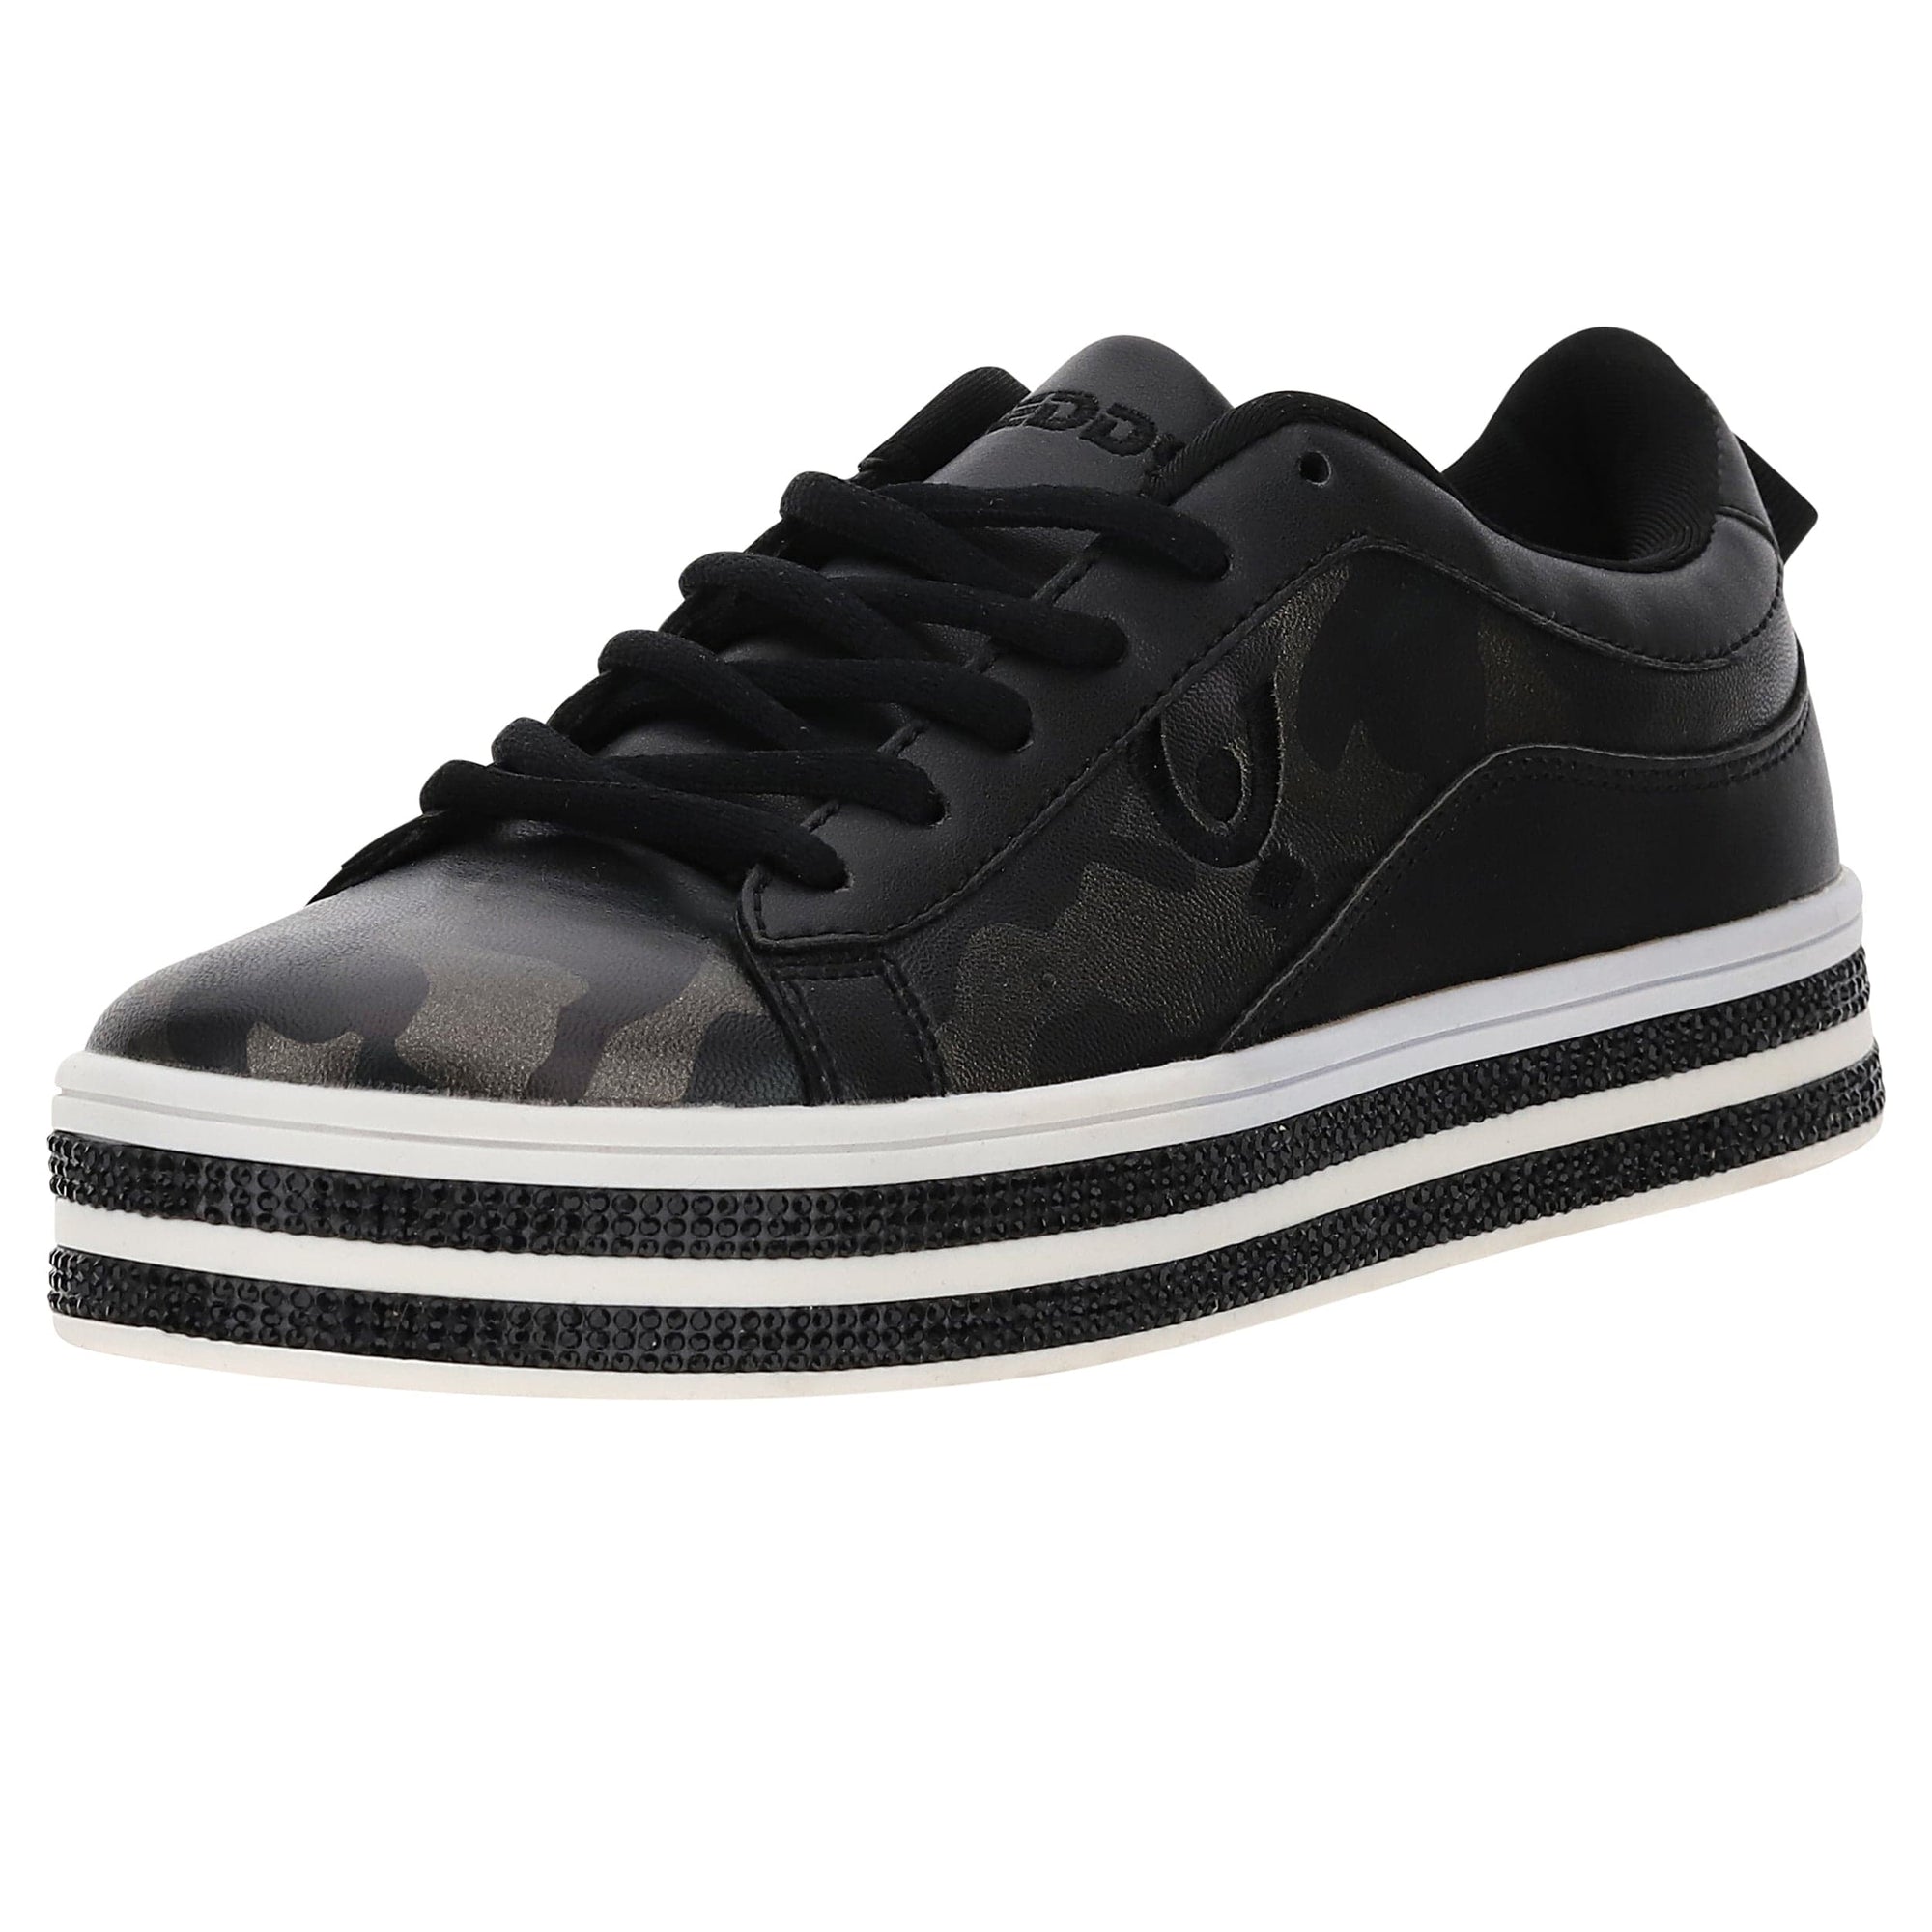 Women’s Camouflage Trainers - Black 1